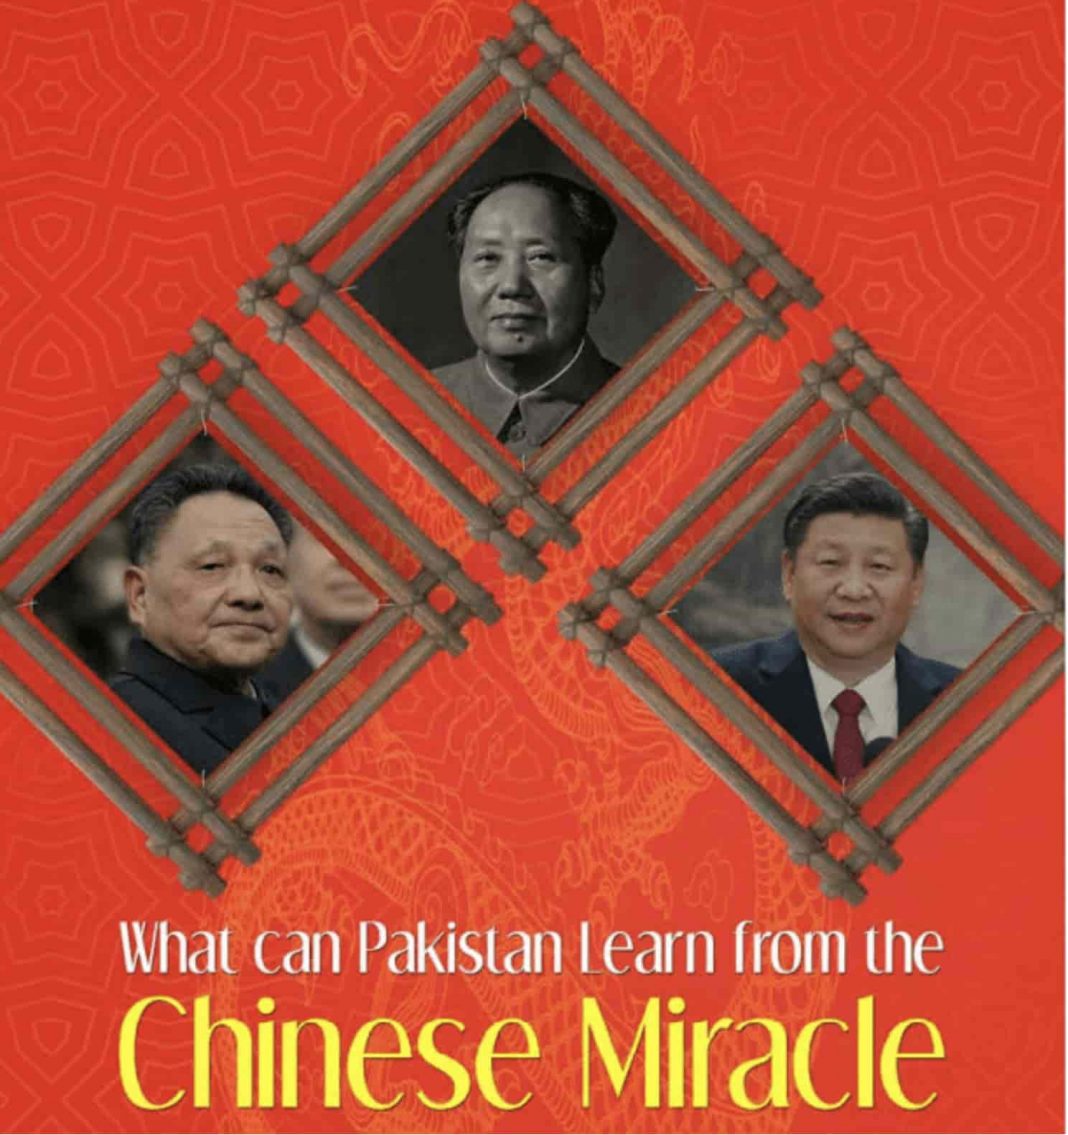 Pakistan learning from China